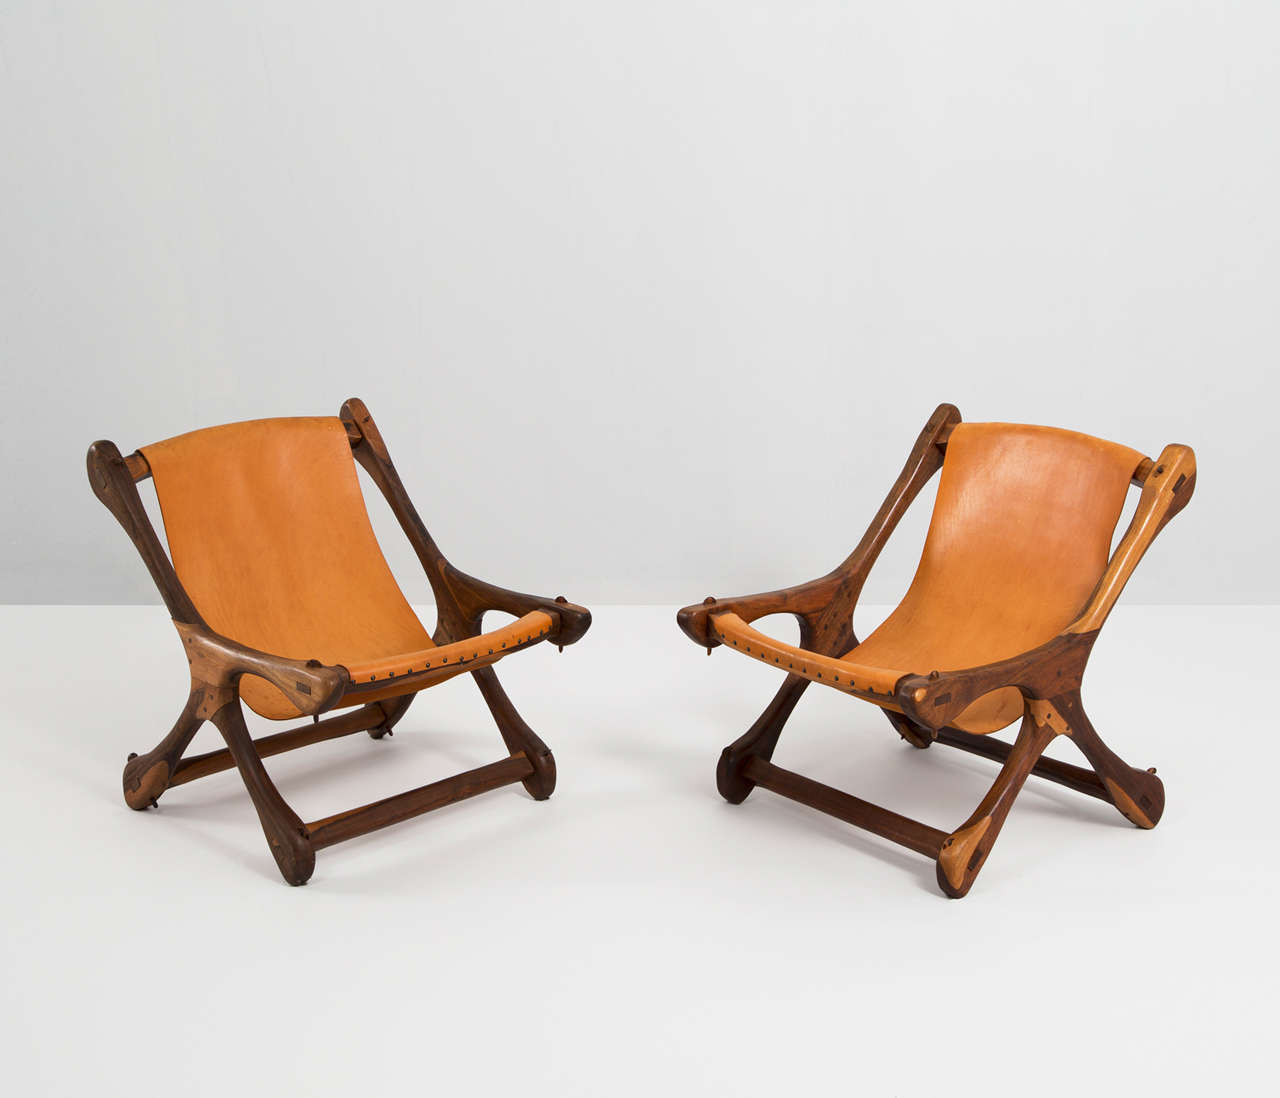 Pair of sling lounge chairs, in rosewood and leather, by Don Shoemaker, Mexico 1960s. 

Very nice and interesting set of 2 winger sling chairs in cognac leather with a magnificent patina by Don Shoemaker for Senal furniture mexico. The Sling